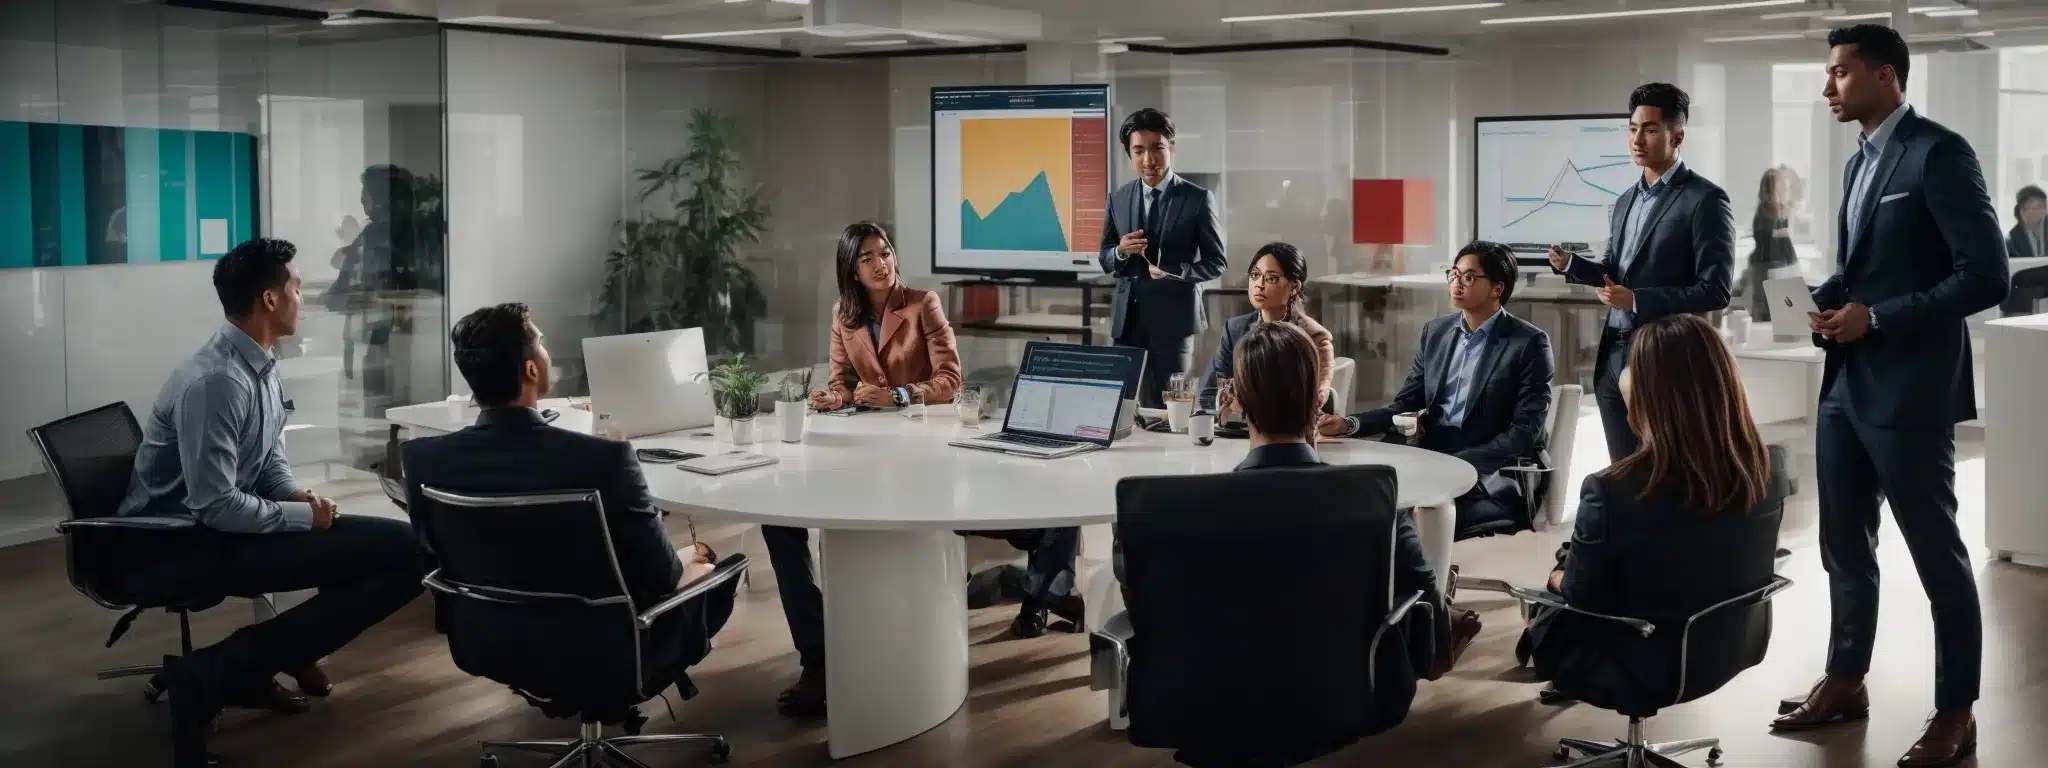 A Strategy Meeting In A Modern Office With Marketers Discussing Over A Large Screen Displaying Colorful Graphs.